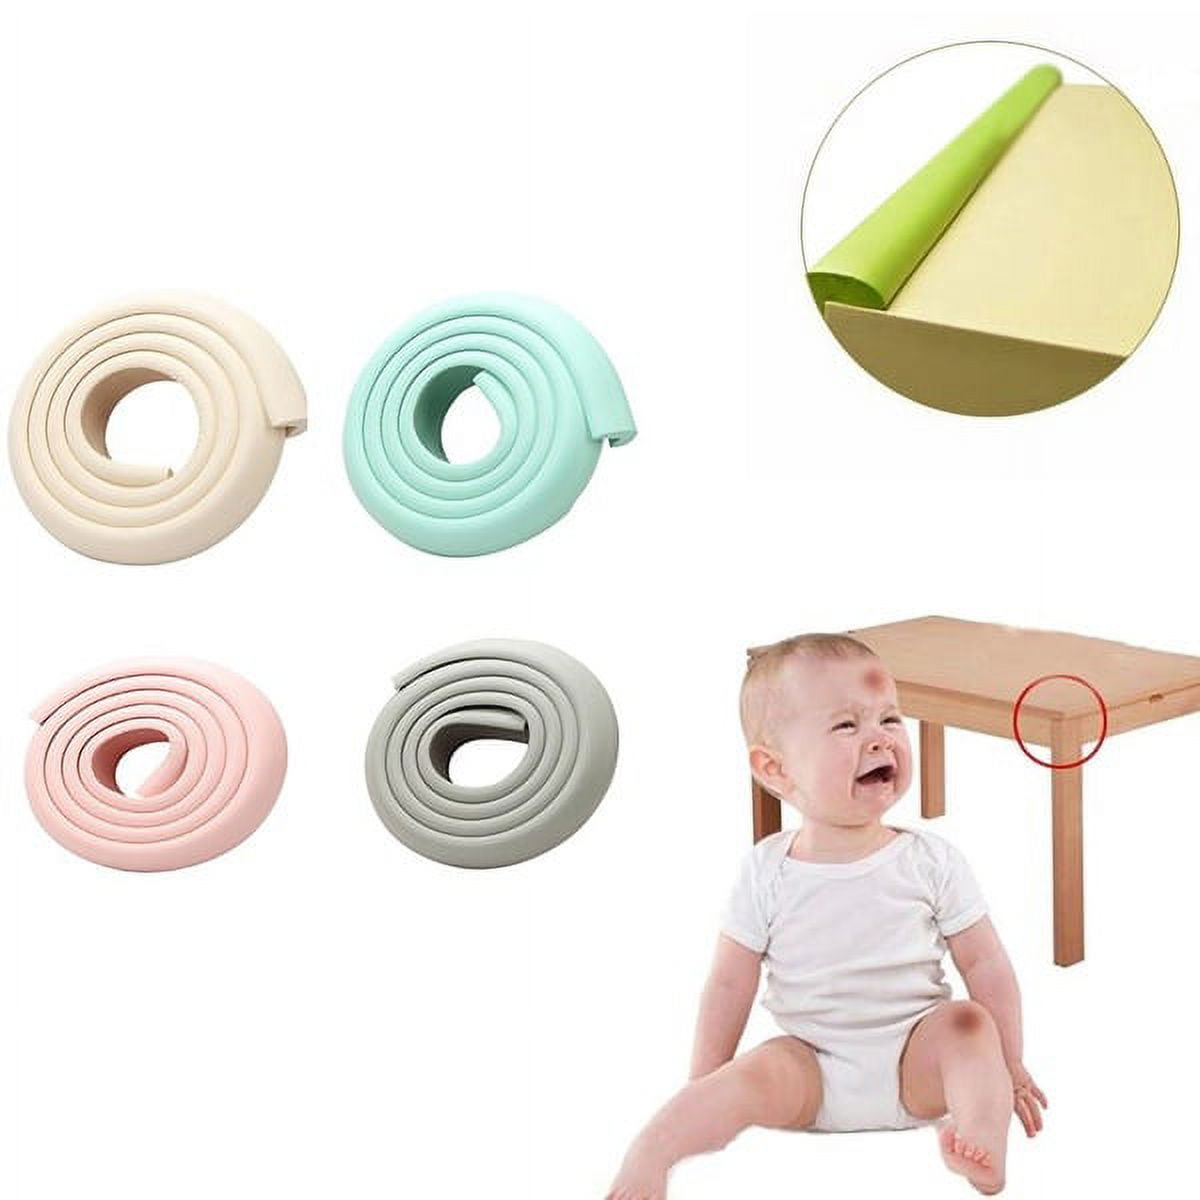 Baby Proofing Edge Protector for Baby 4.92 ft Corner Protector Baby Proof  Desk Edge Protector with Upgraded Pre-Taped Strong Adhesive Kids Safety